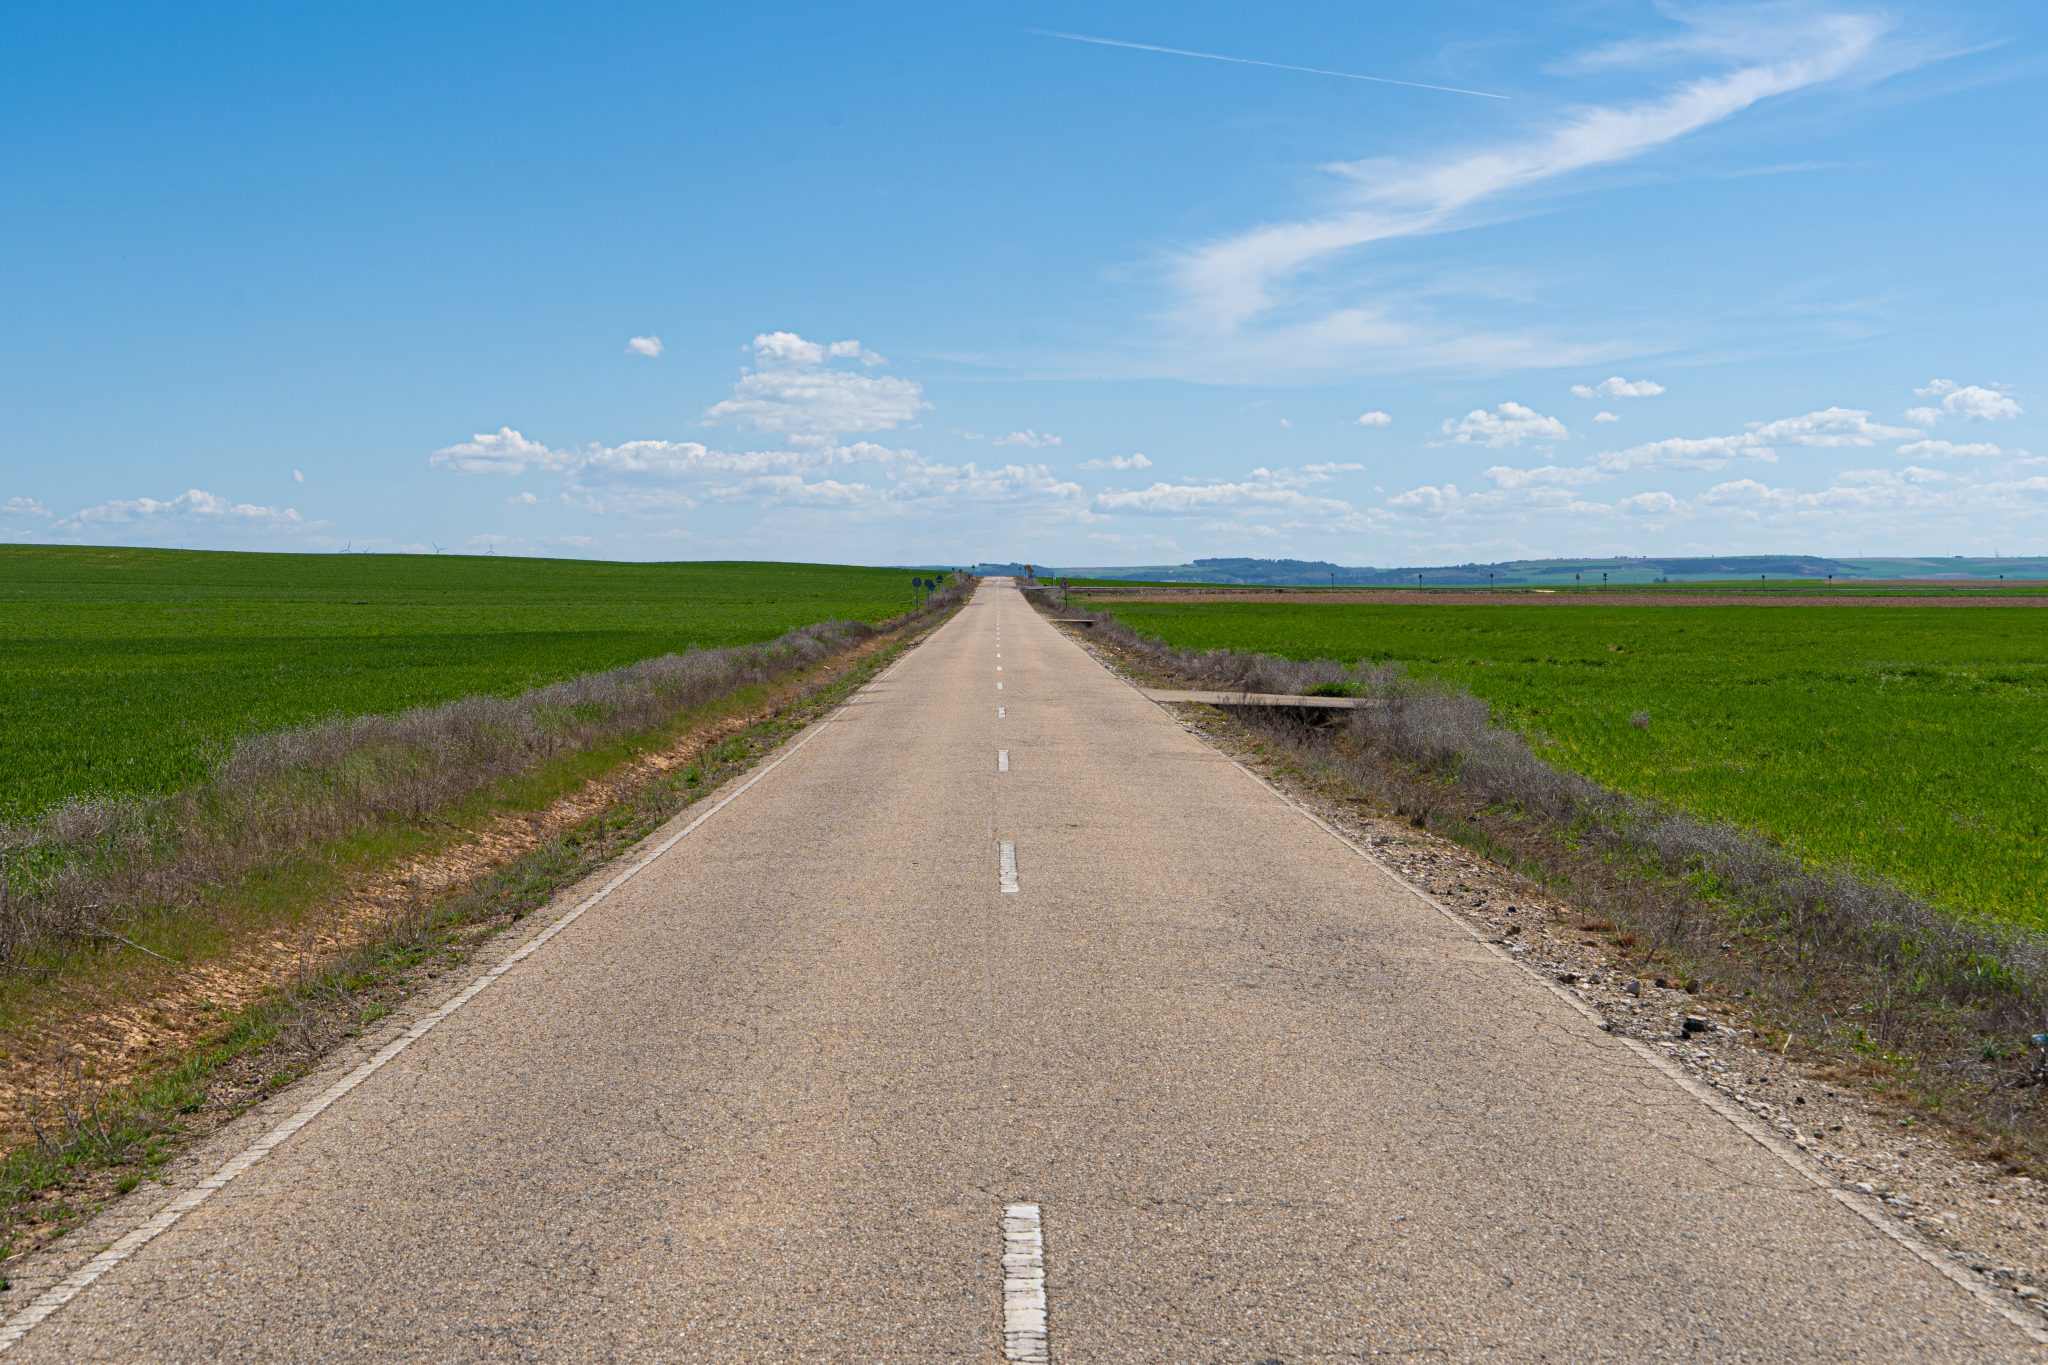 Photo of a lonely road that disappears into the horizon and crosses a field of green grass with blue sky and a few clouds.